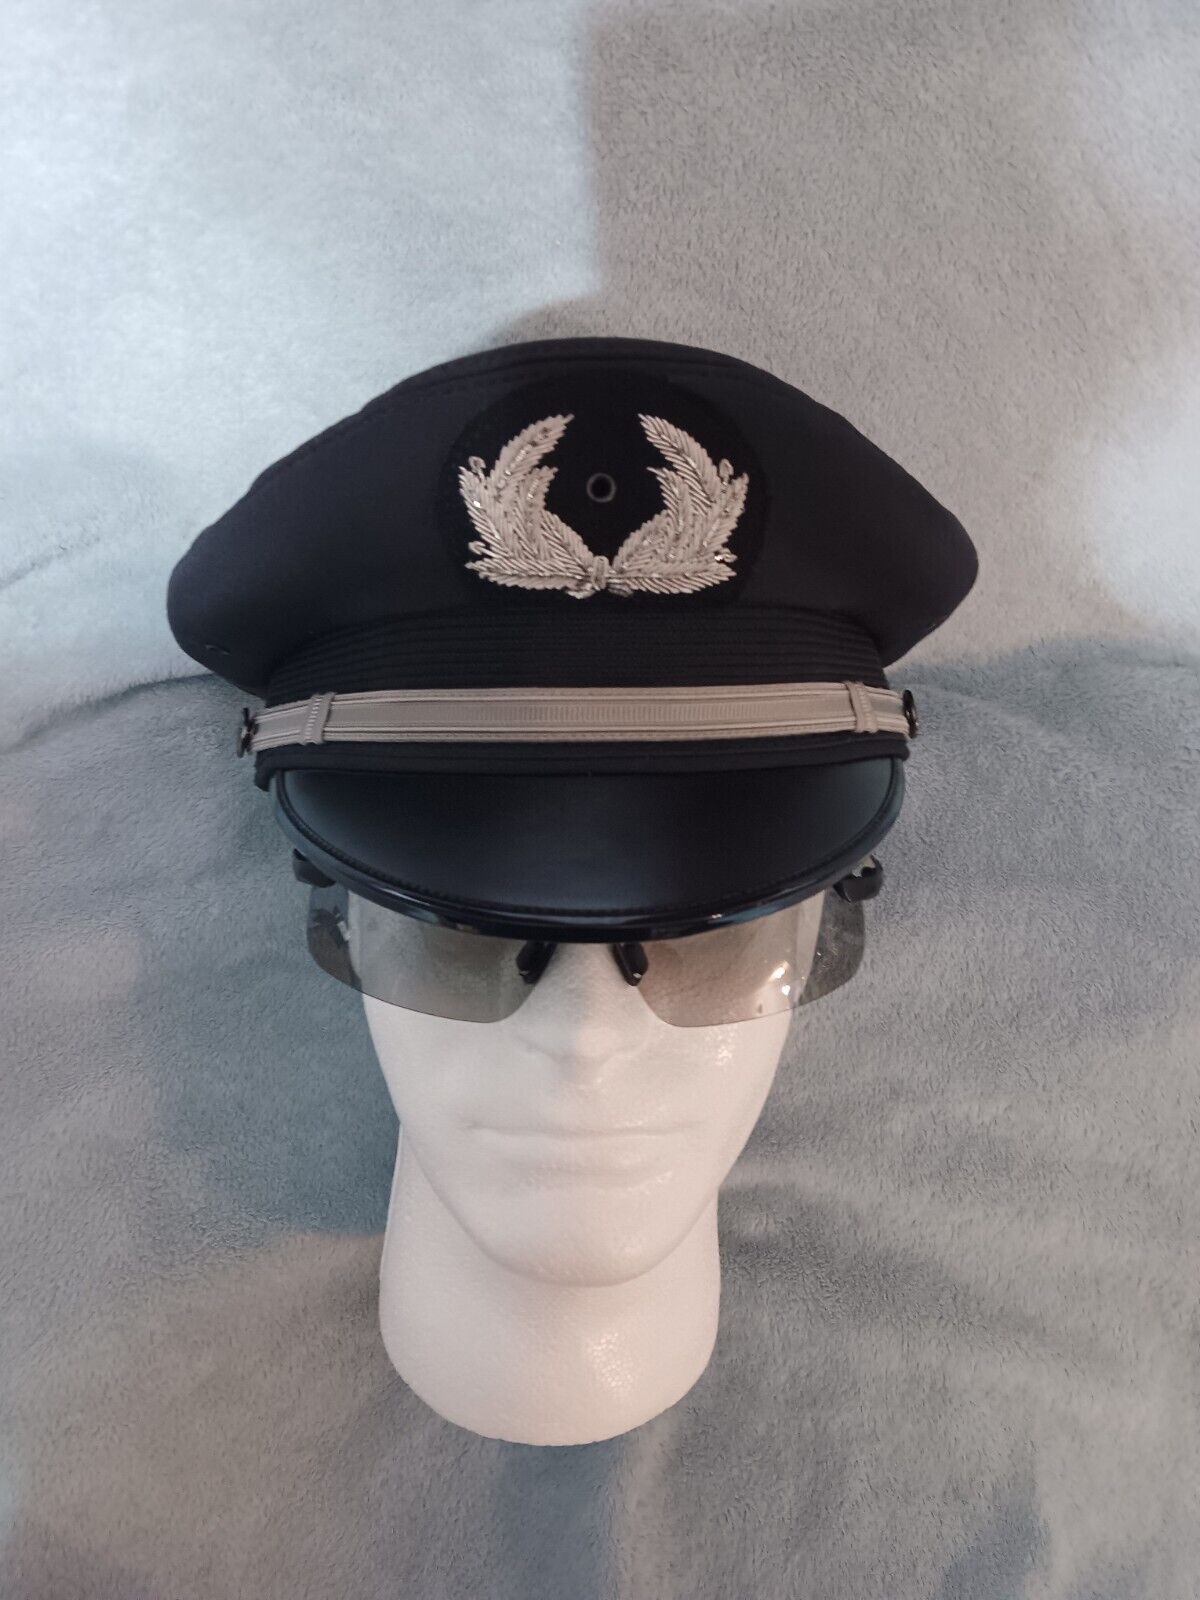 VINTAGE AMERICAN AIRLINES PILOT HAT SIZE 7 1/4, 50% WOOL, 46% POLYESTER